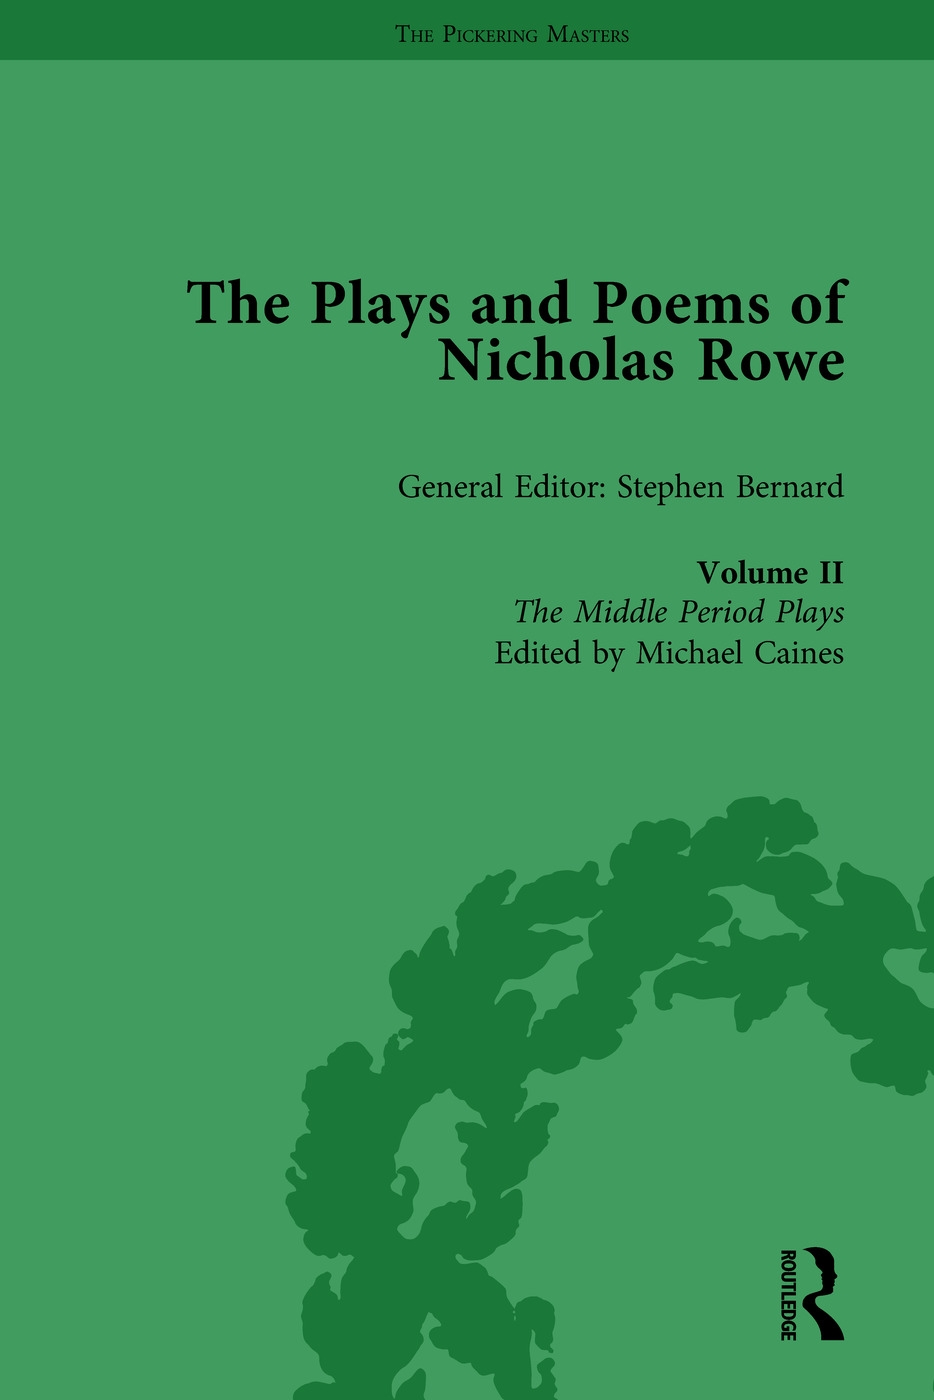 The Plays and Poems of Nicholas Rowe, Volume II: The Middle Period Plays